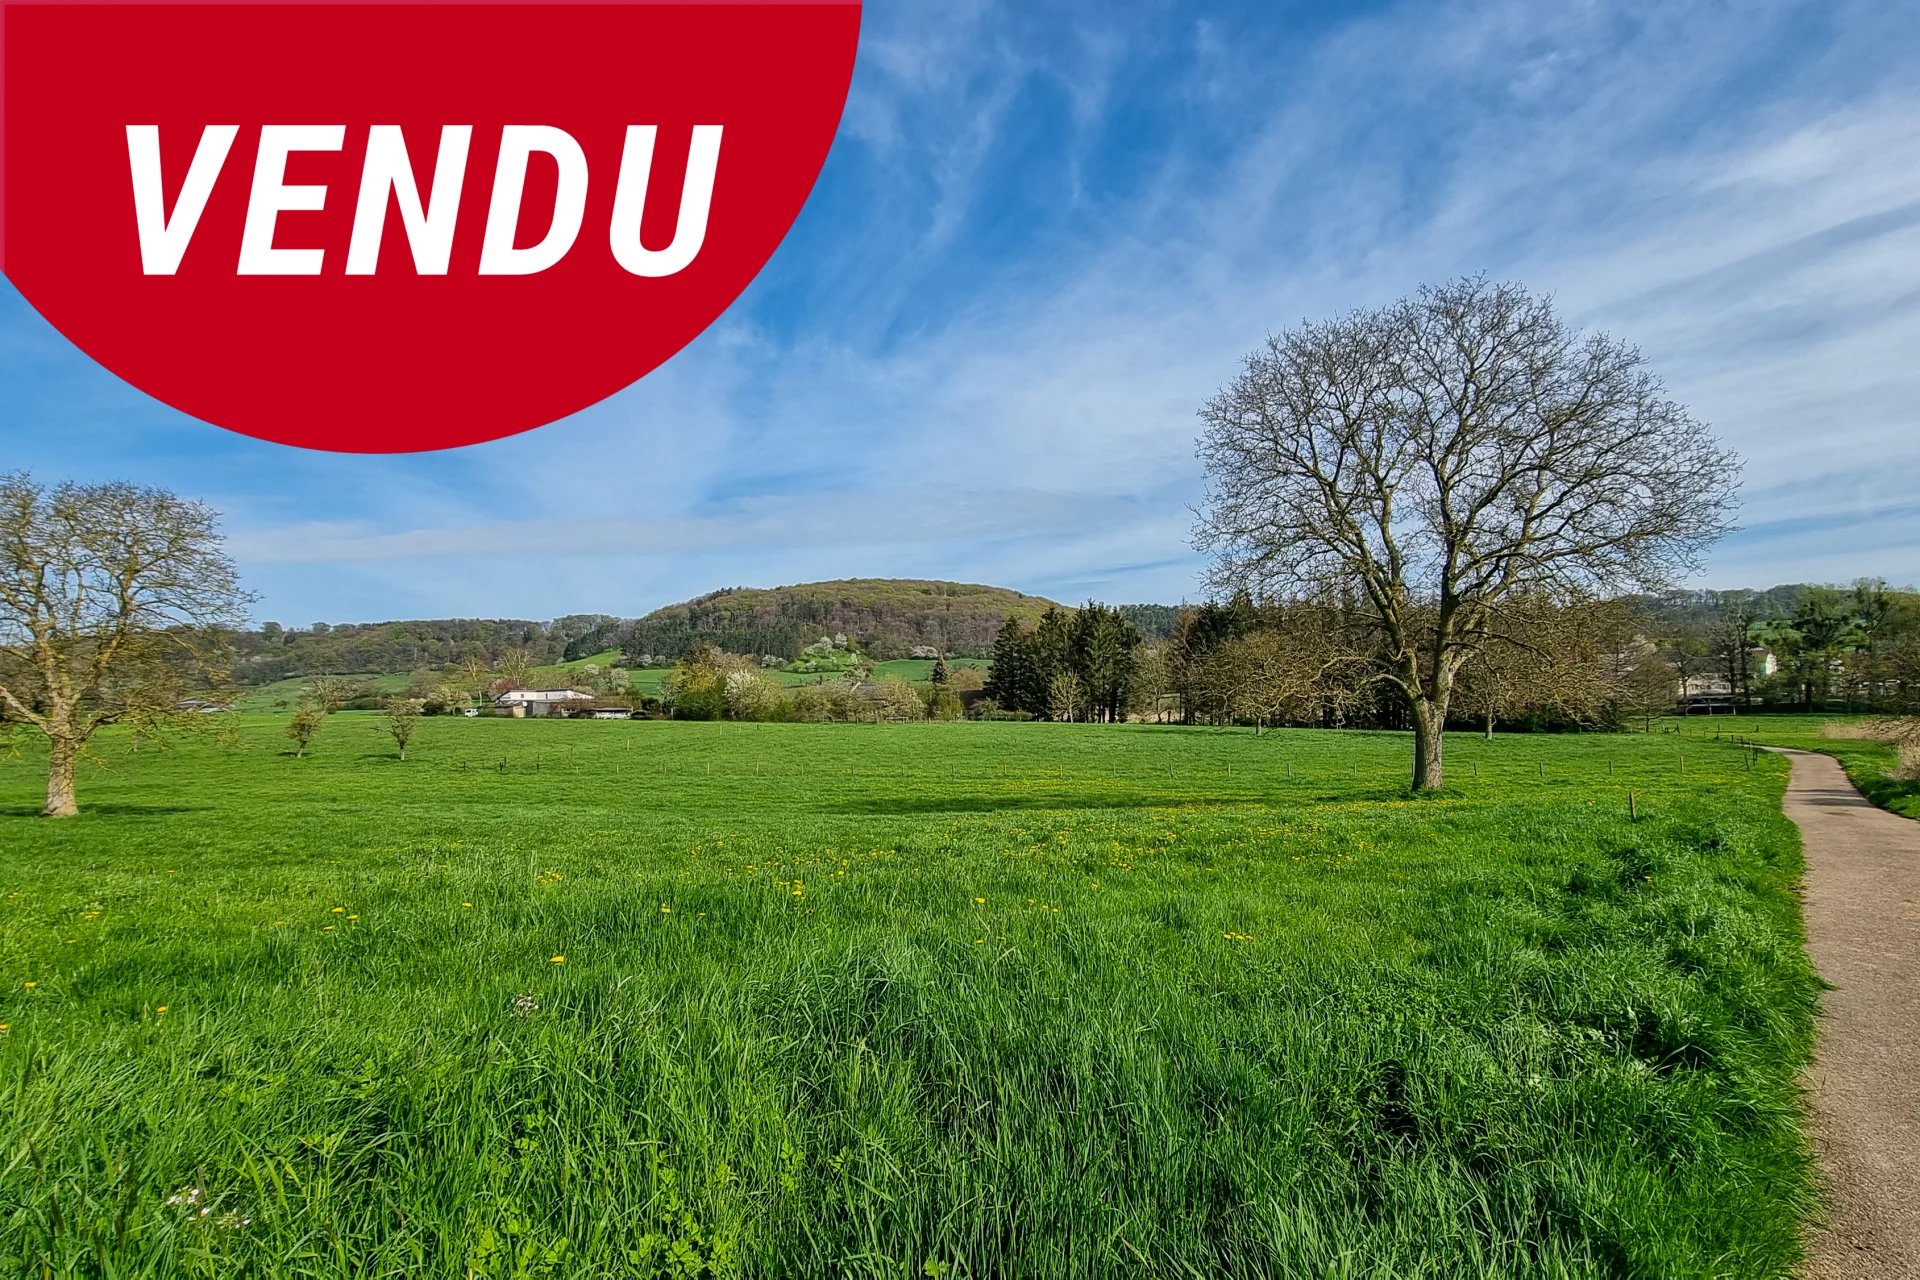 SOLD - Arable non-building land in Hemstal and Zittig